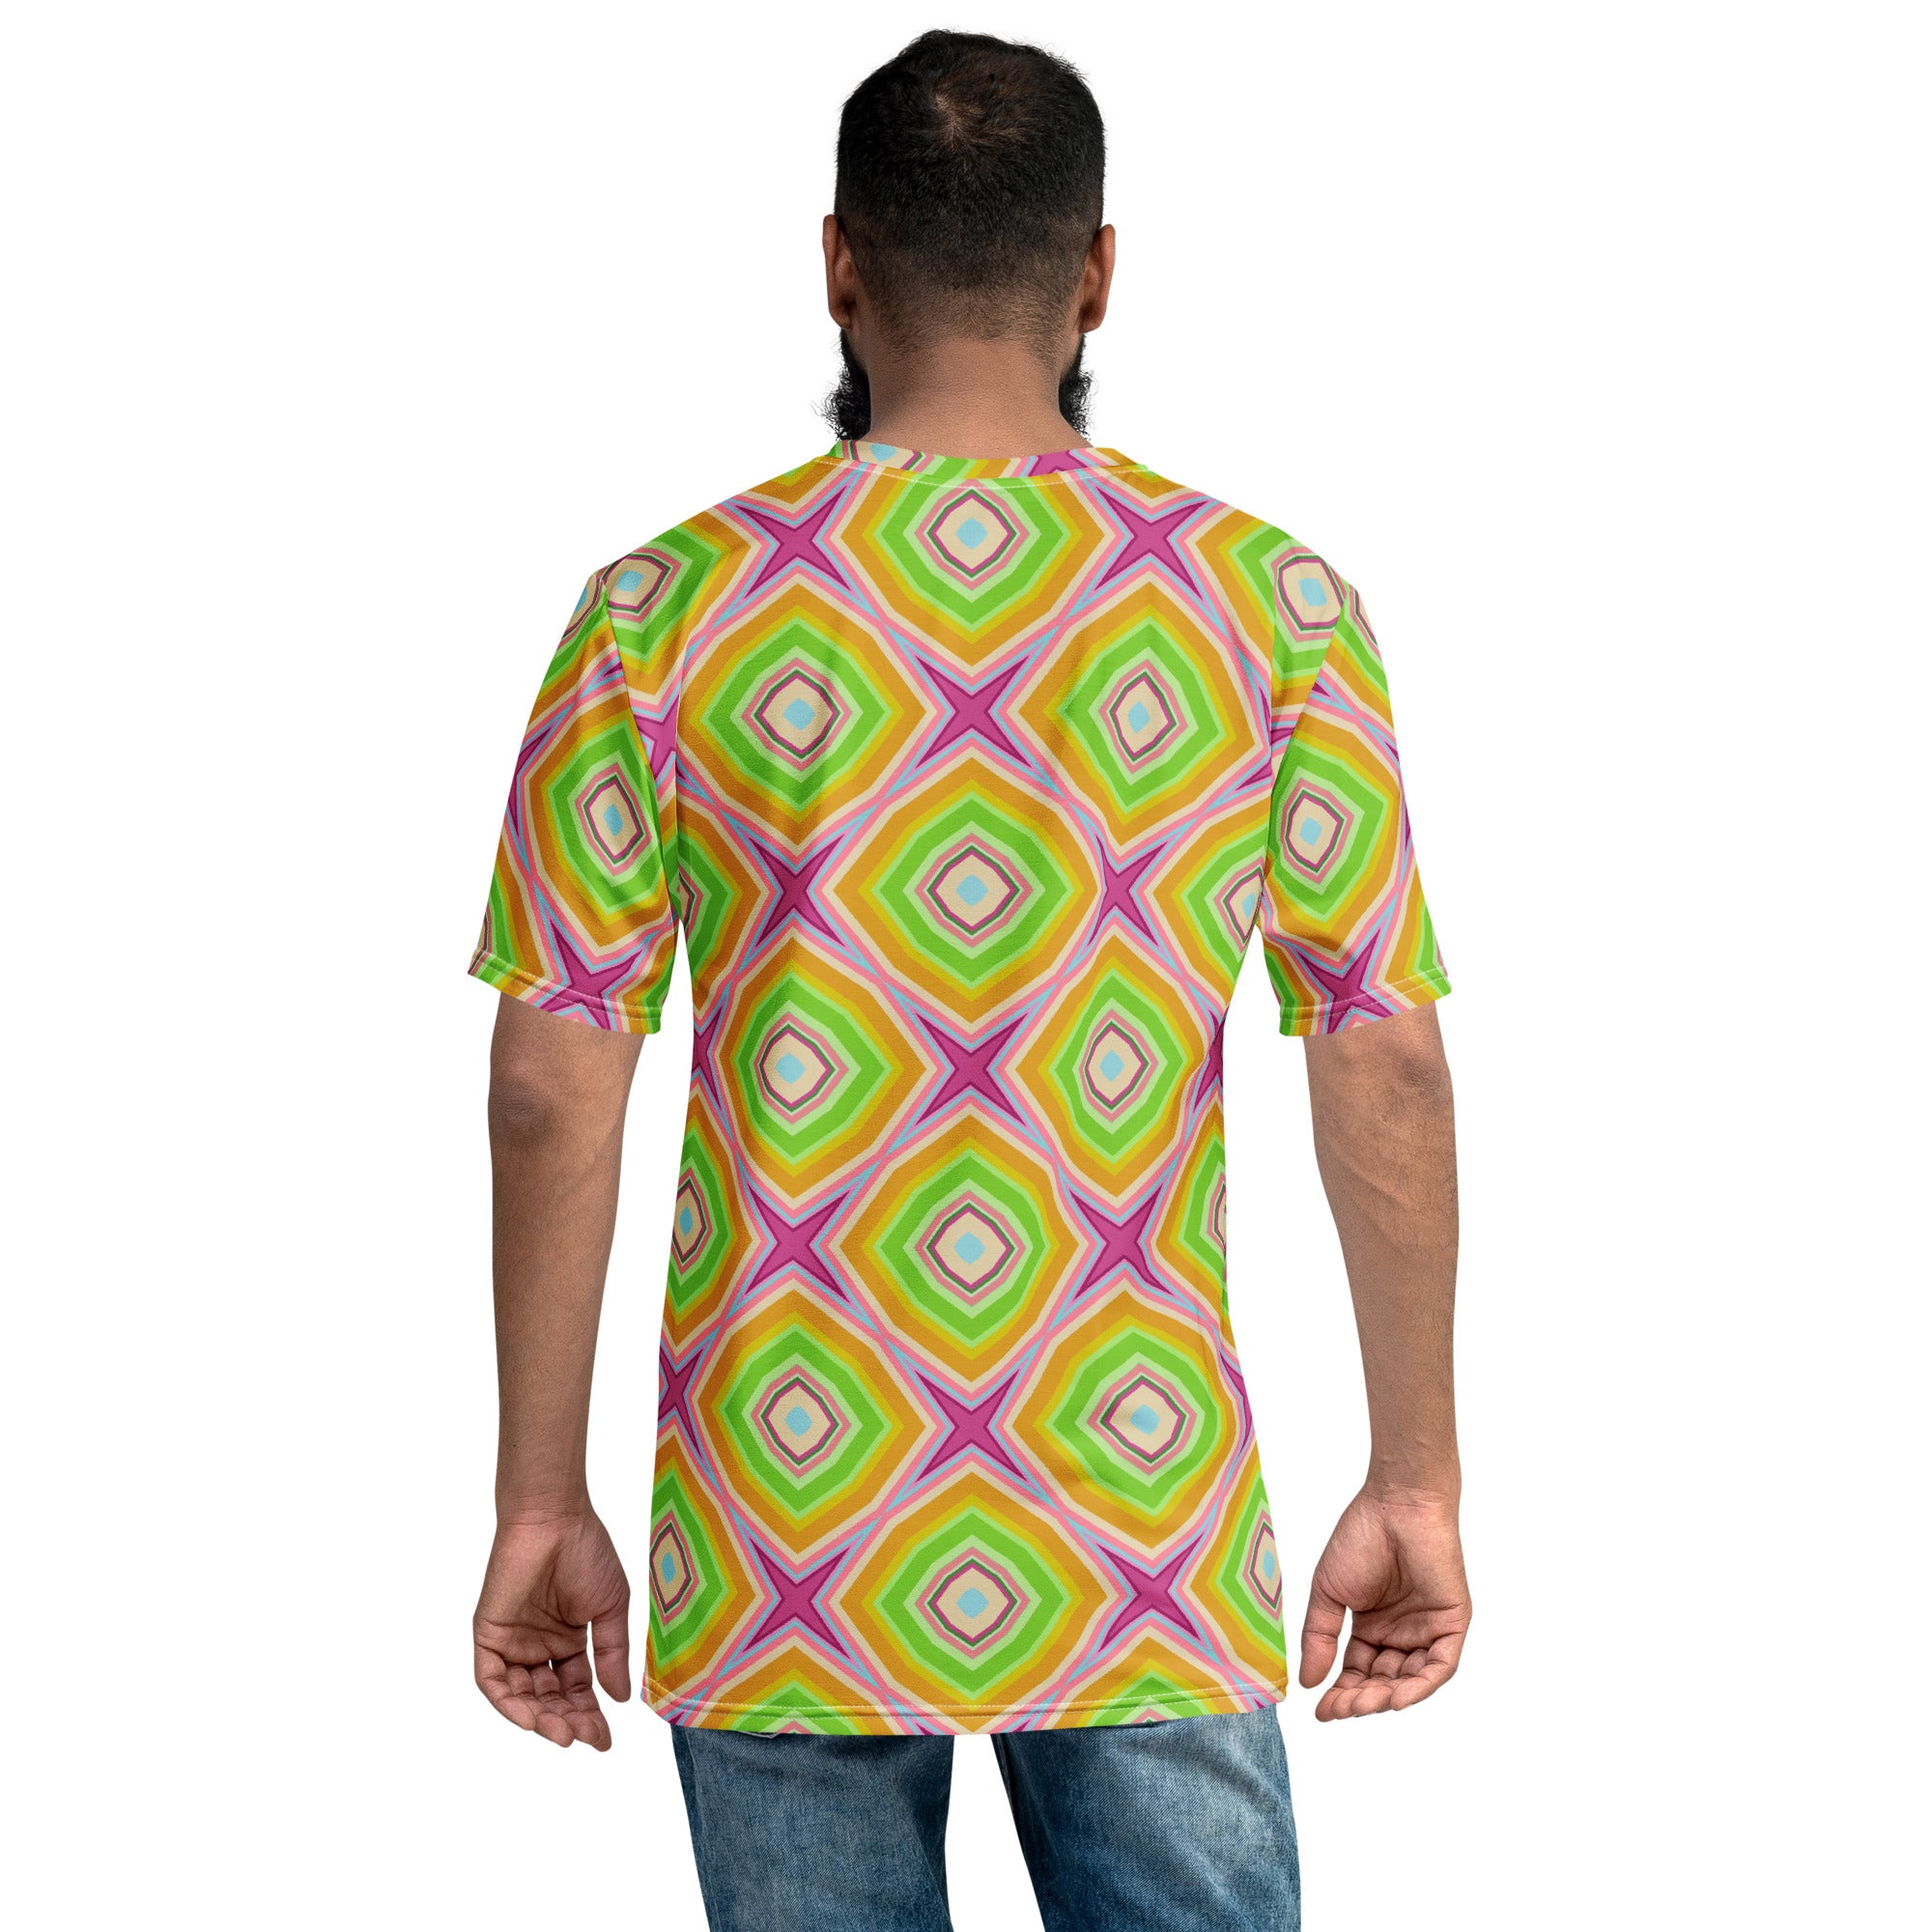 Stylish Men's Crewneck Tee with Abstract Design.